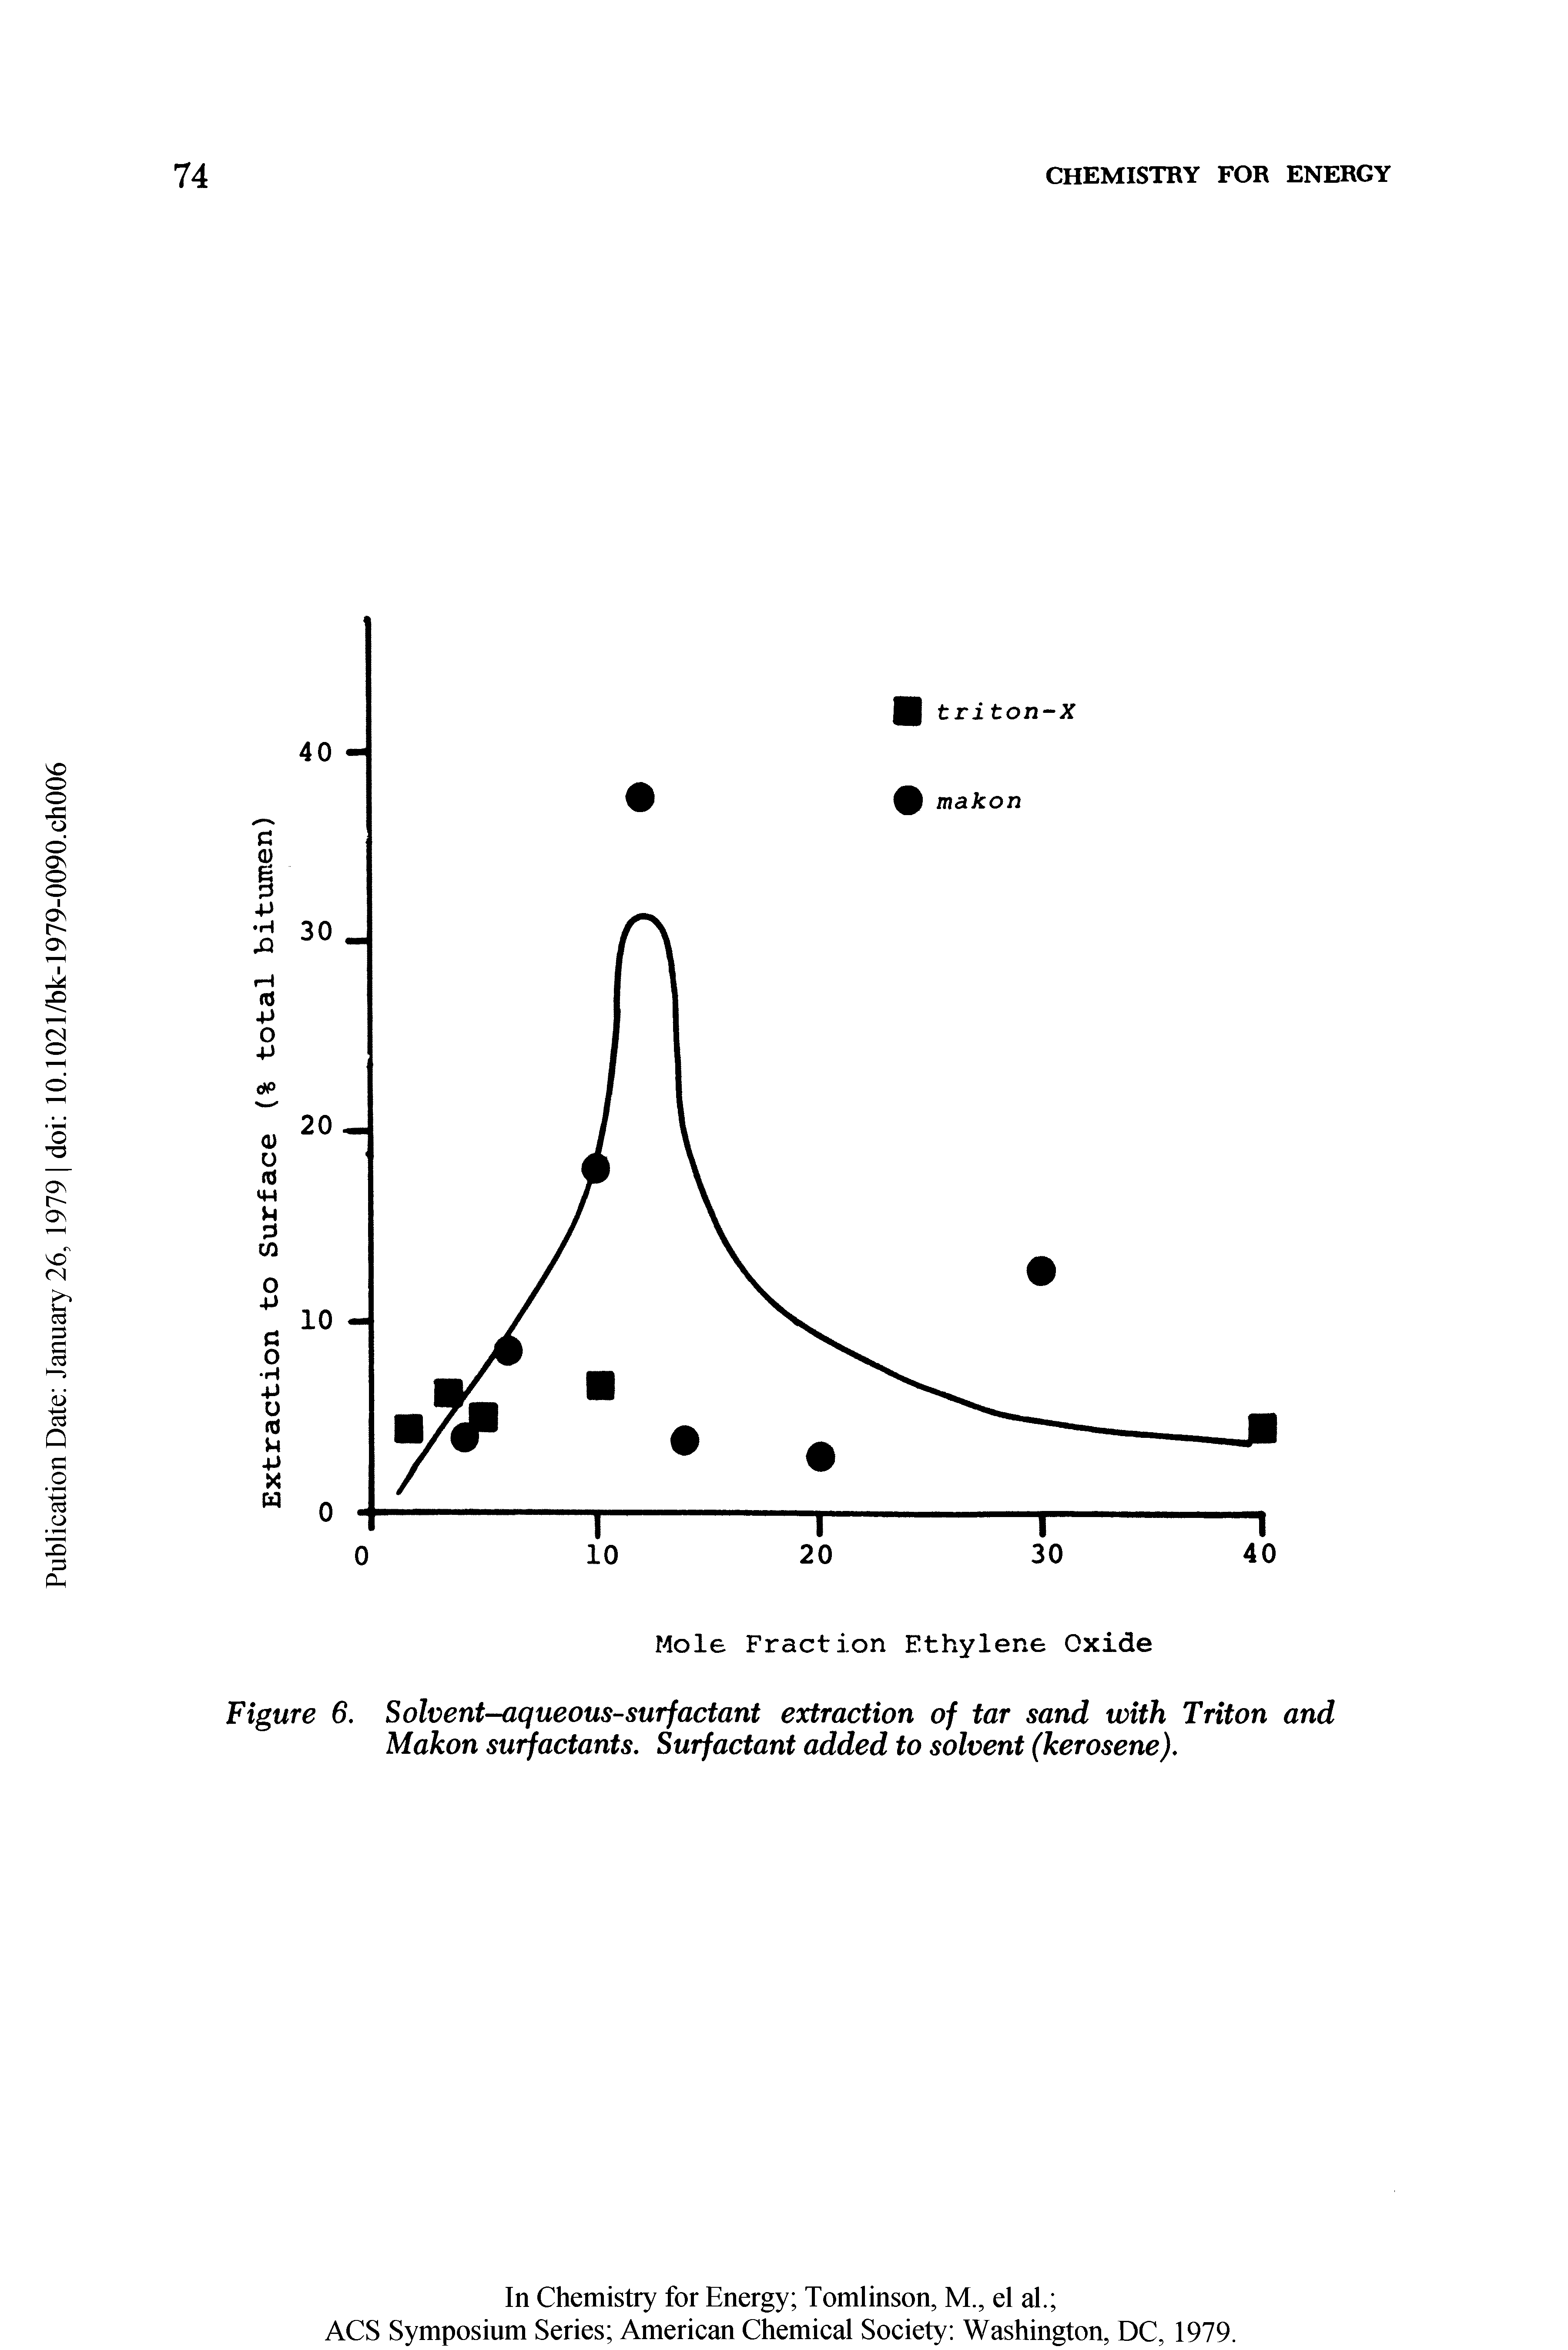 Figure 6. Solvent-aqueous-surfactant extraction of tar sand with Triton and Makon surfactants. Surfactant added to solvent (kerosene).